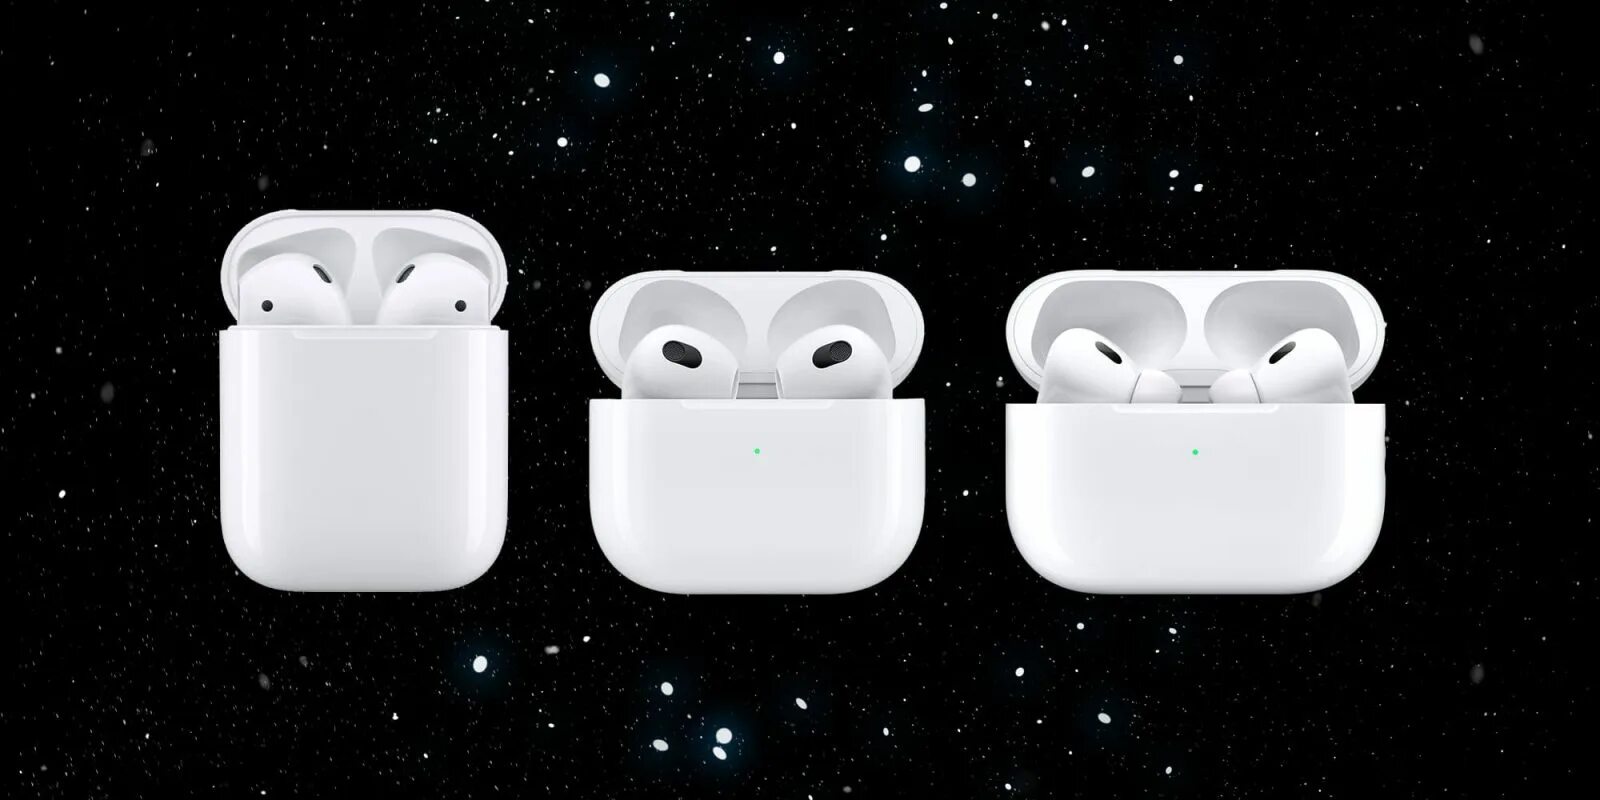 Airpods pro дата. AIRPODS Pro 3. Apple AIRPODS Pro 2. AIRPODS 2 И 3. Apple AIRPODS 2 габариты.